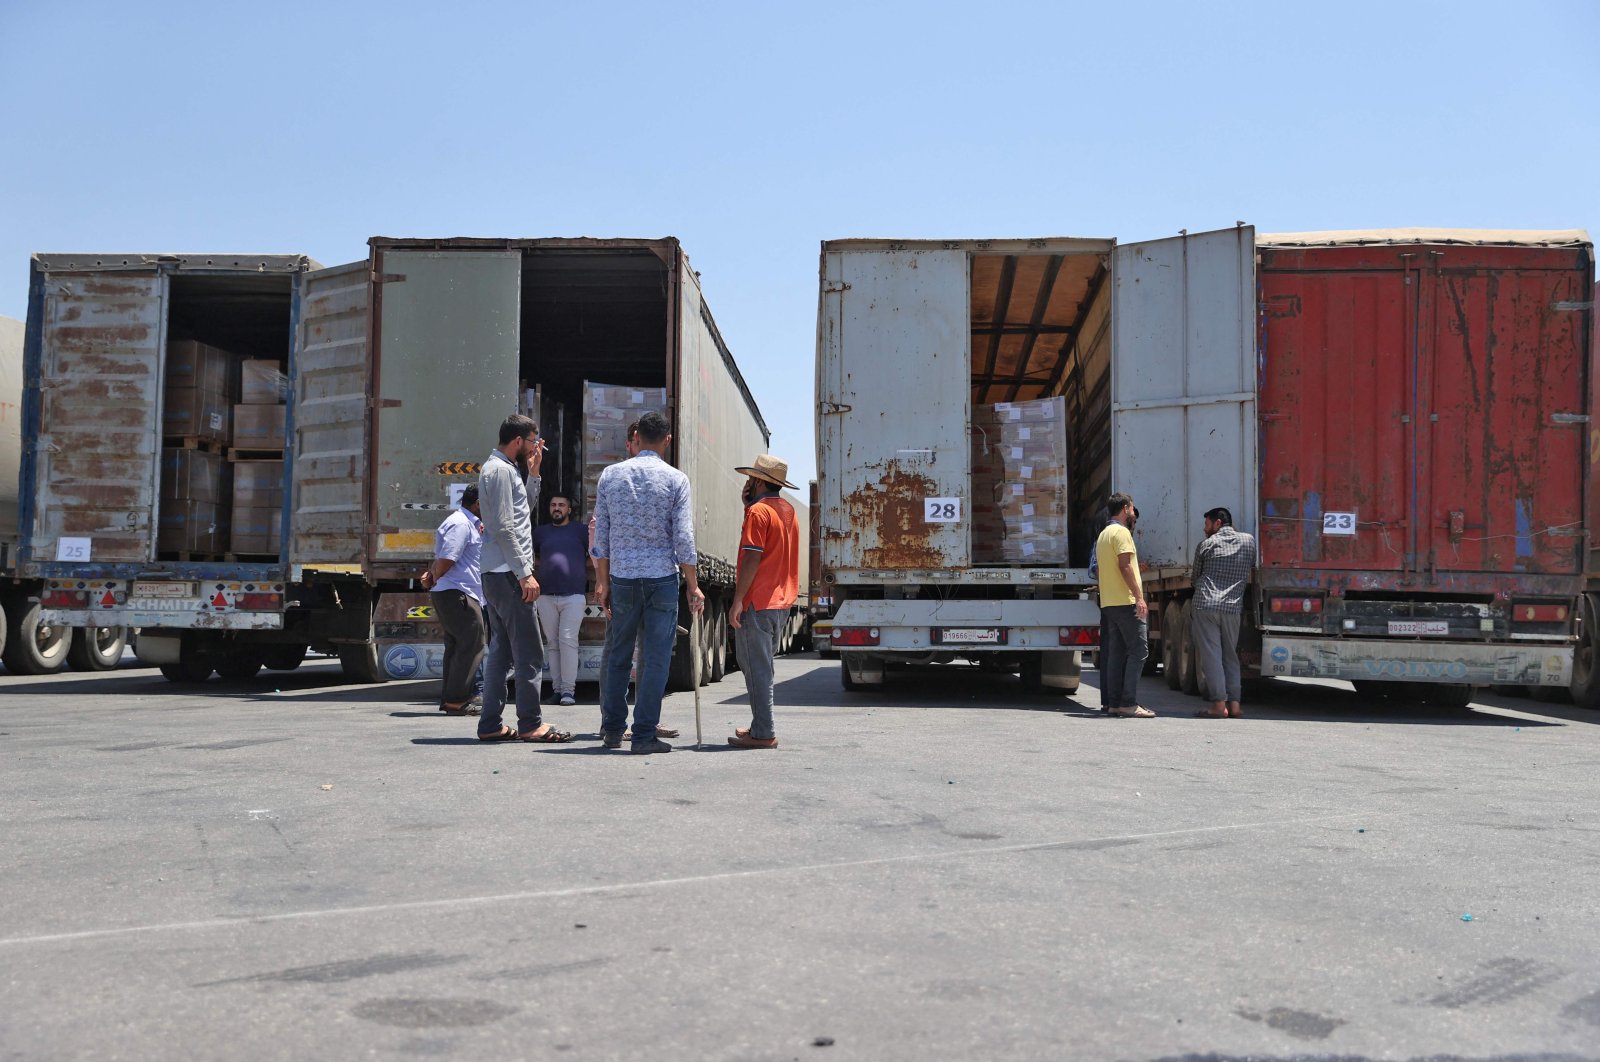 Customs officers inspect a convoy of humanitarian aid after crossing into Syria from Turkey through the Bab al-Hawa border crossing on July 8, 2022. (AFP Photo)